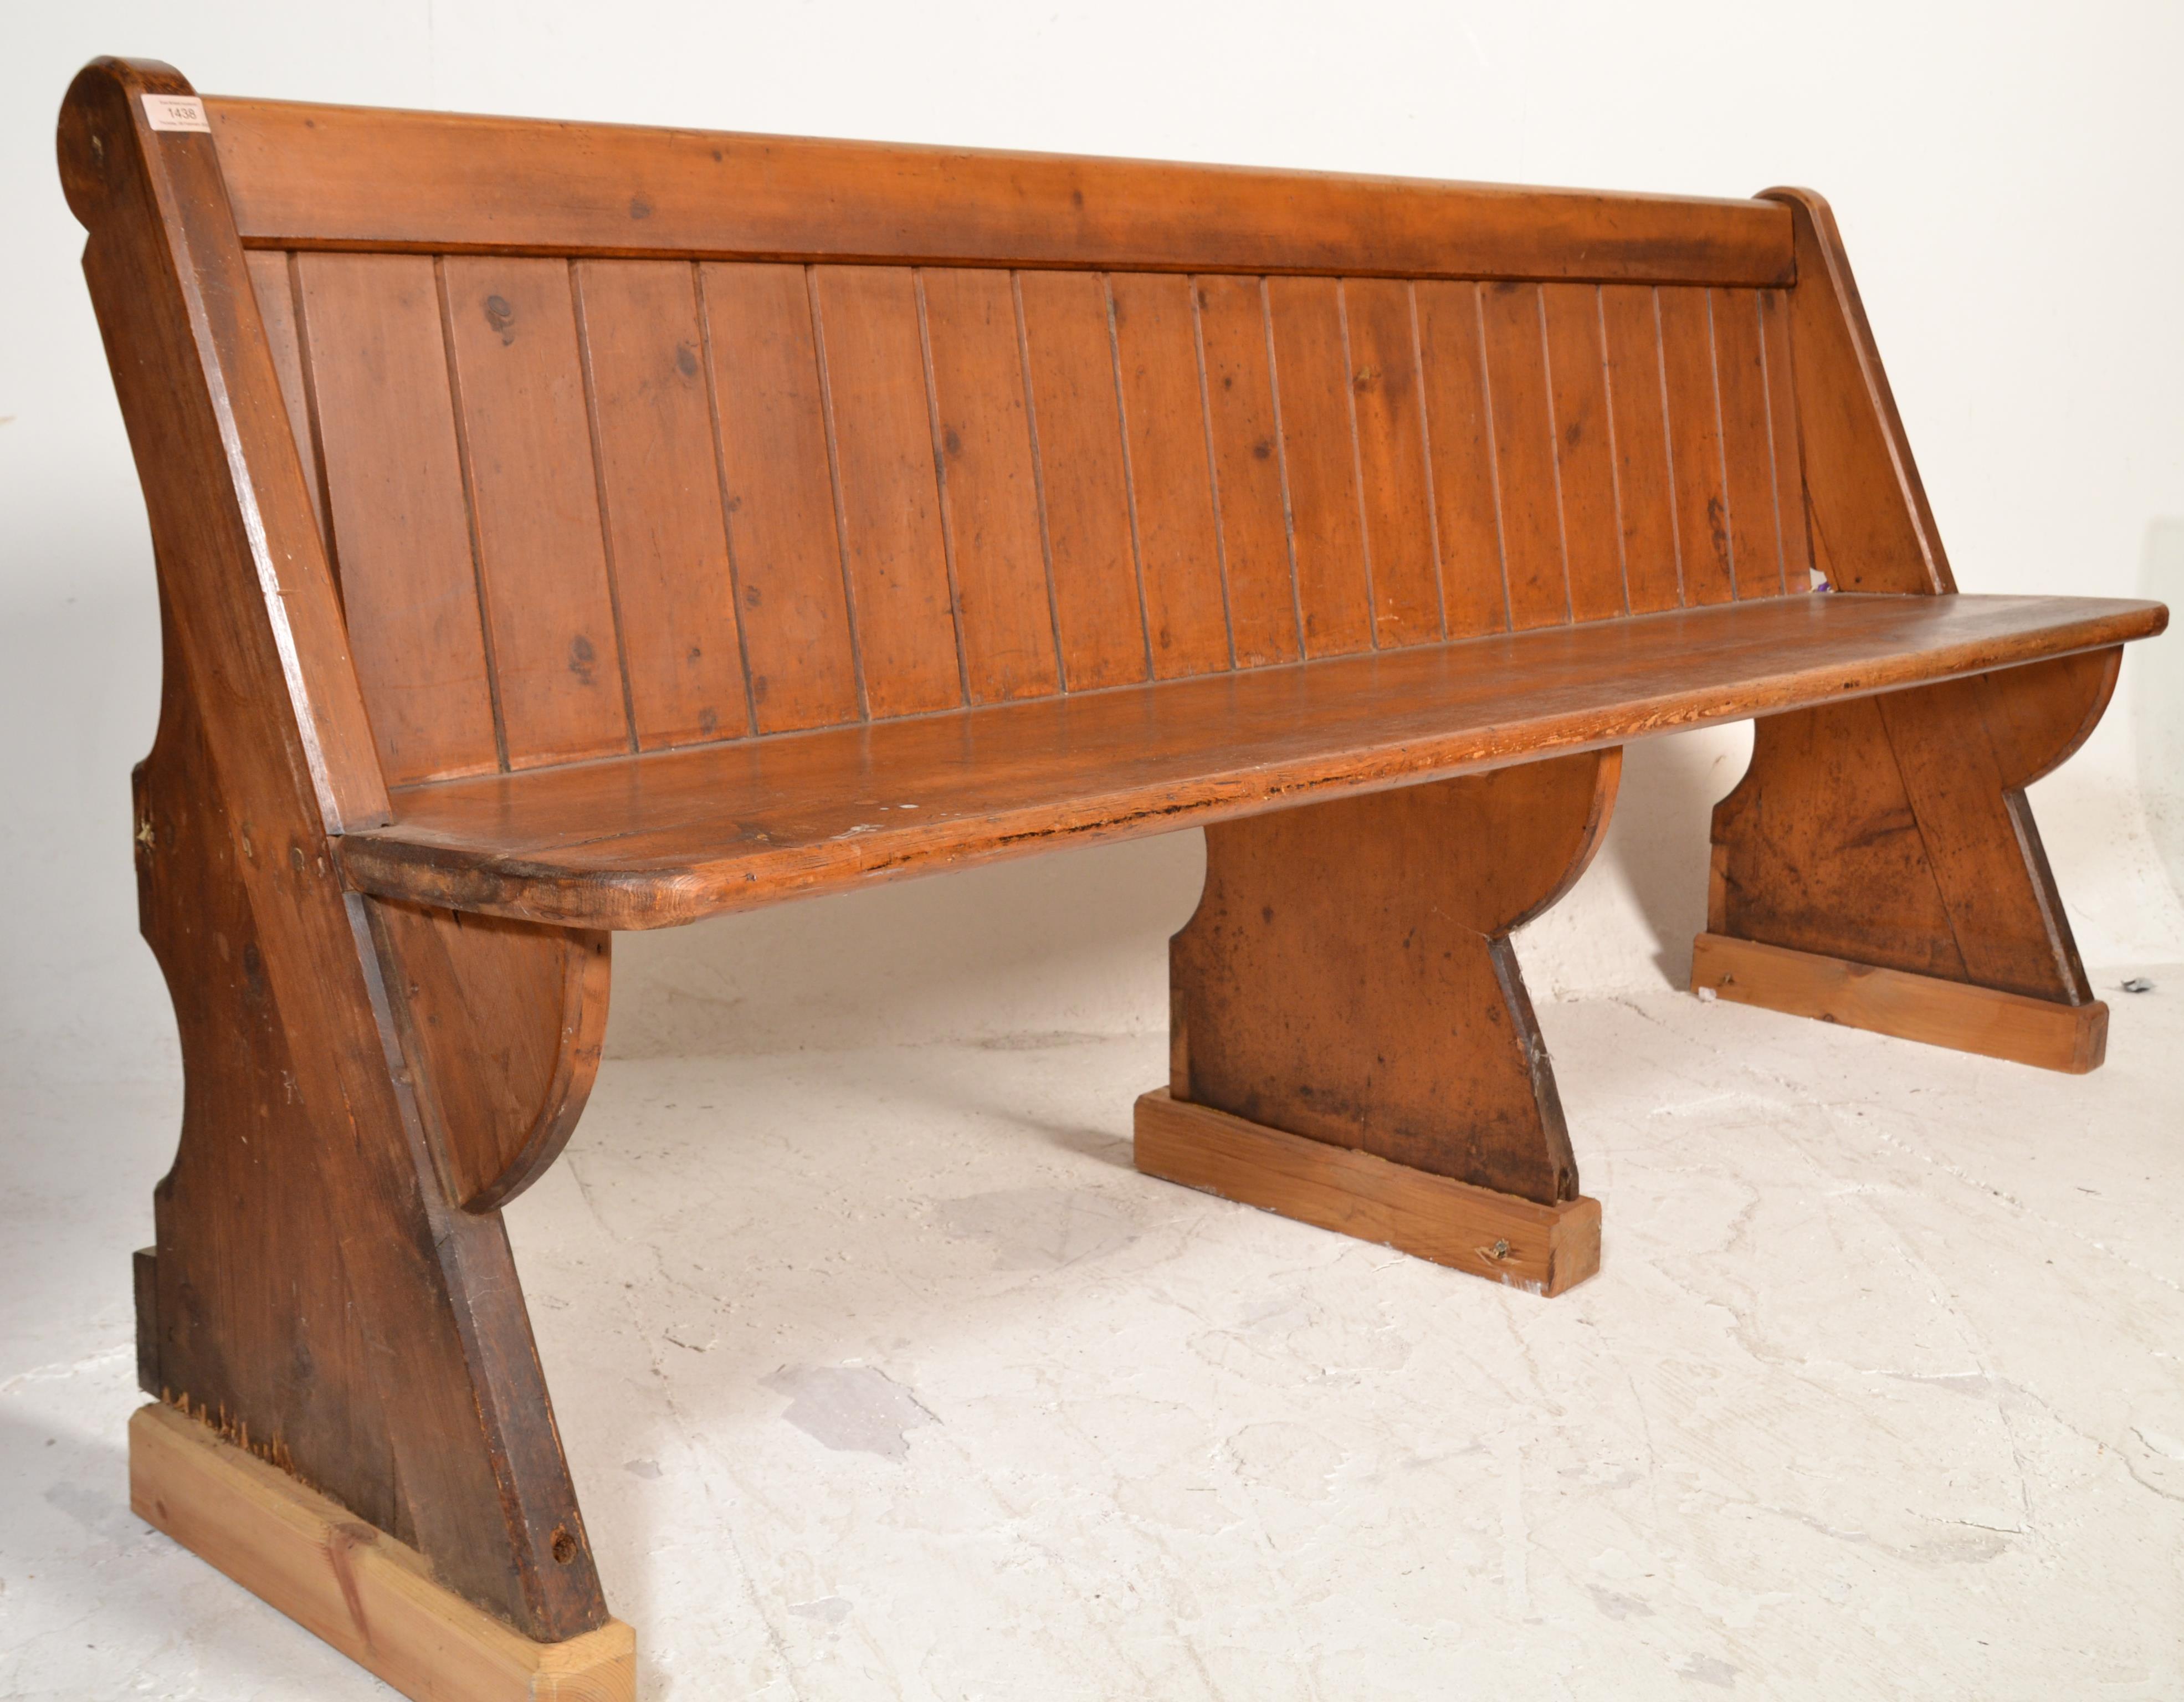 A Victorian 19th century Gothic Arts & Crafts solid oak pew bench of ecclesiastical form being